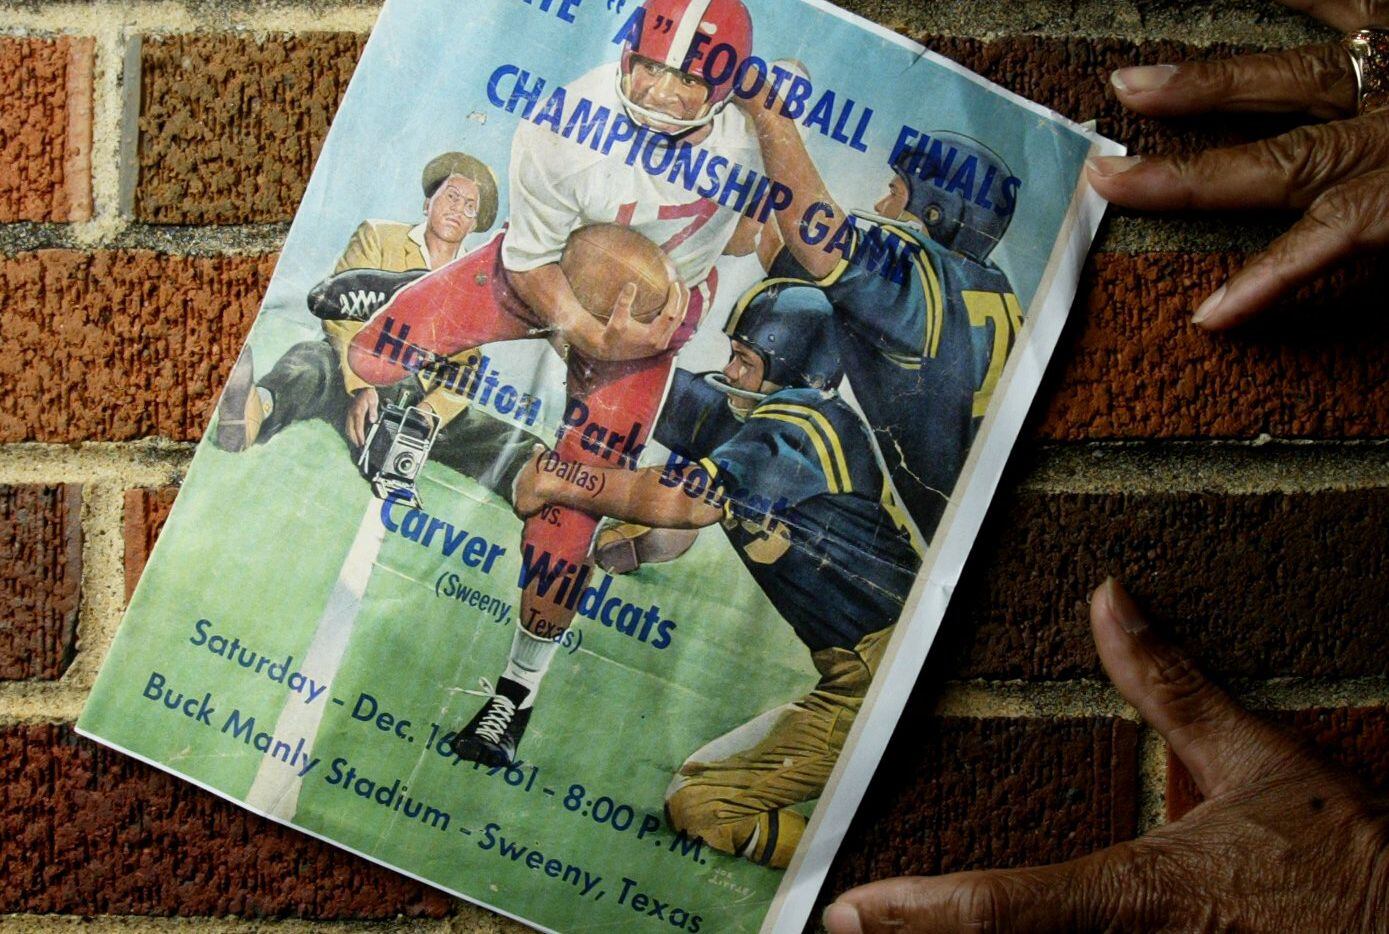 In 1961, Hamilton Park High School, an all-Black school in Richardson ISD, won the city's first state football championship, in what was then called the Prairie View Interscholastic League. Author Michael Hurd will take part in a live virtual event for the Allen Public Library on May 13 to discuss the largely unknown history of Black high school football in Texas.